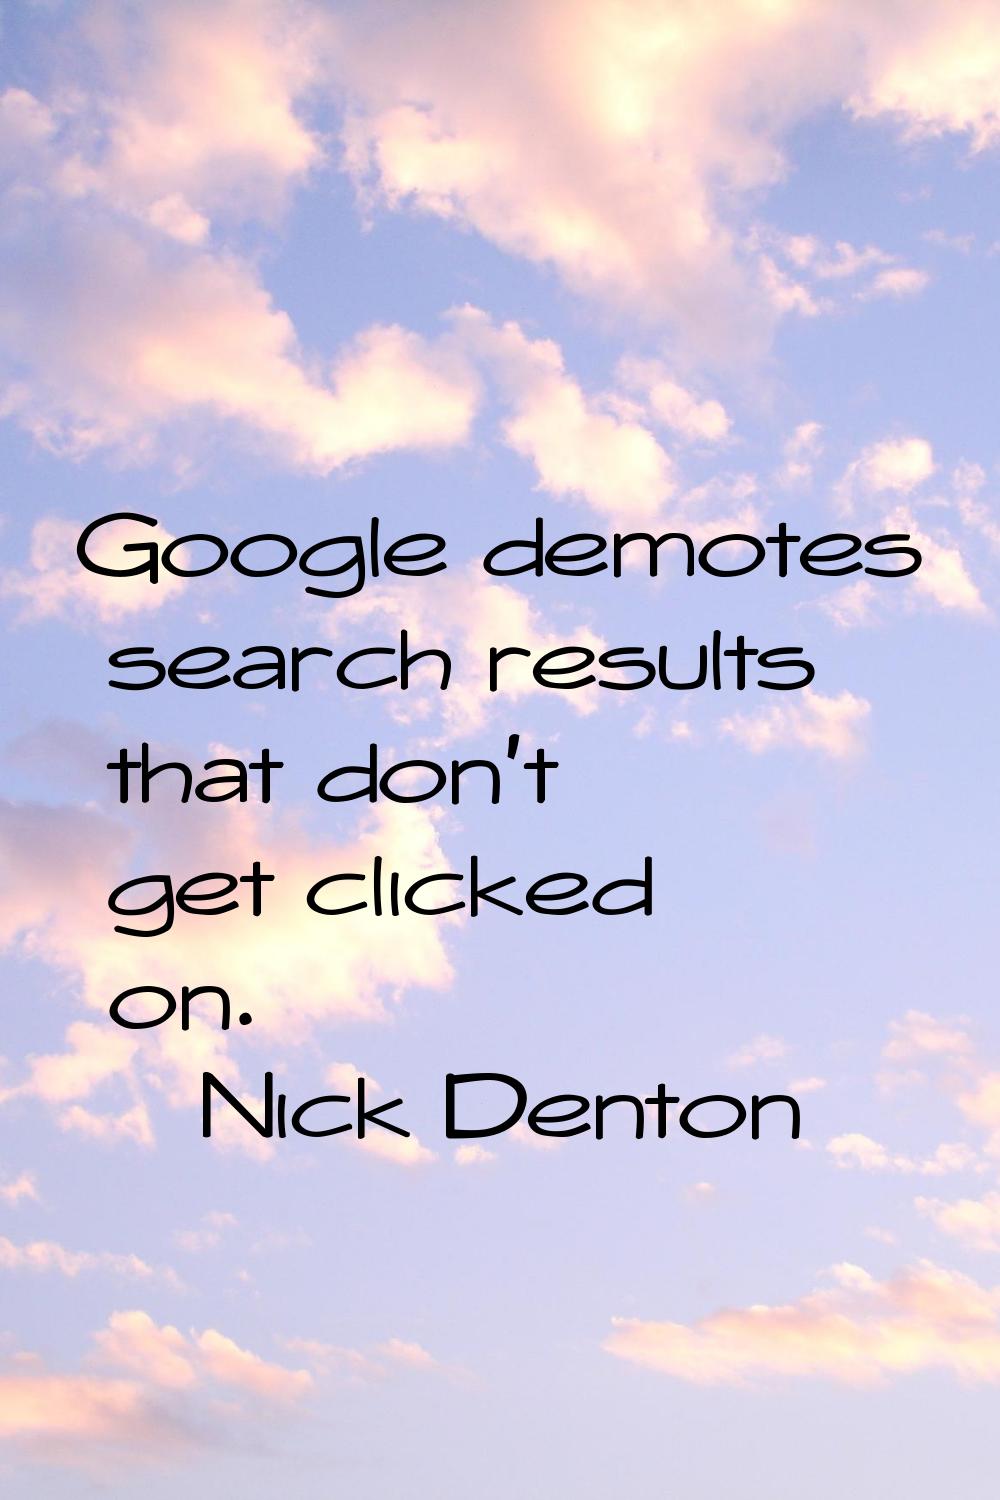 Google demotes search results that don't get clicked on.